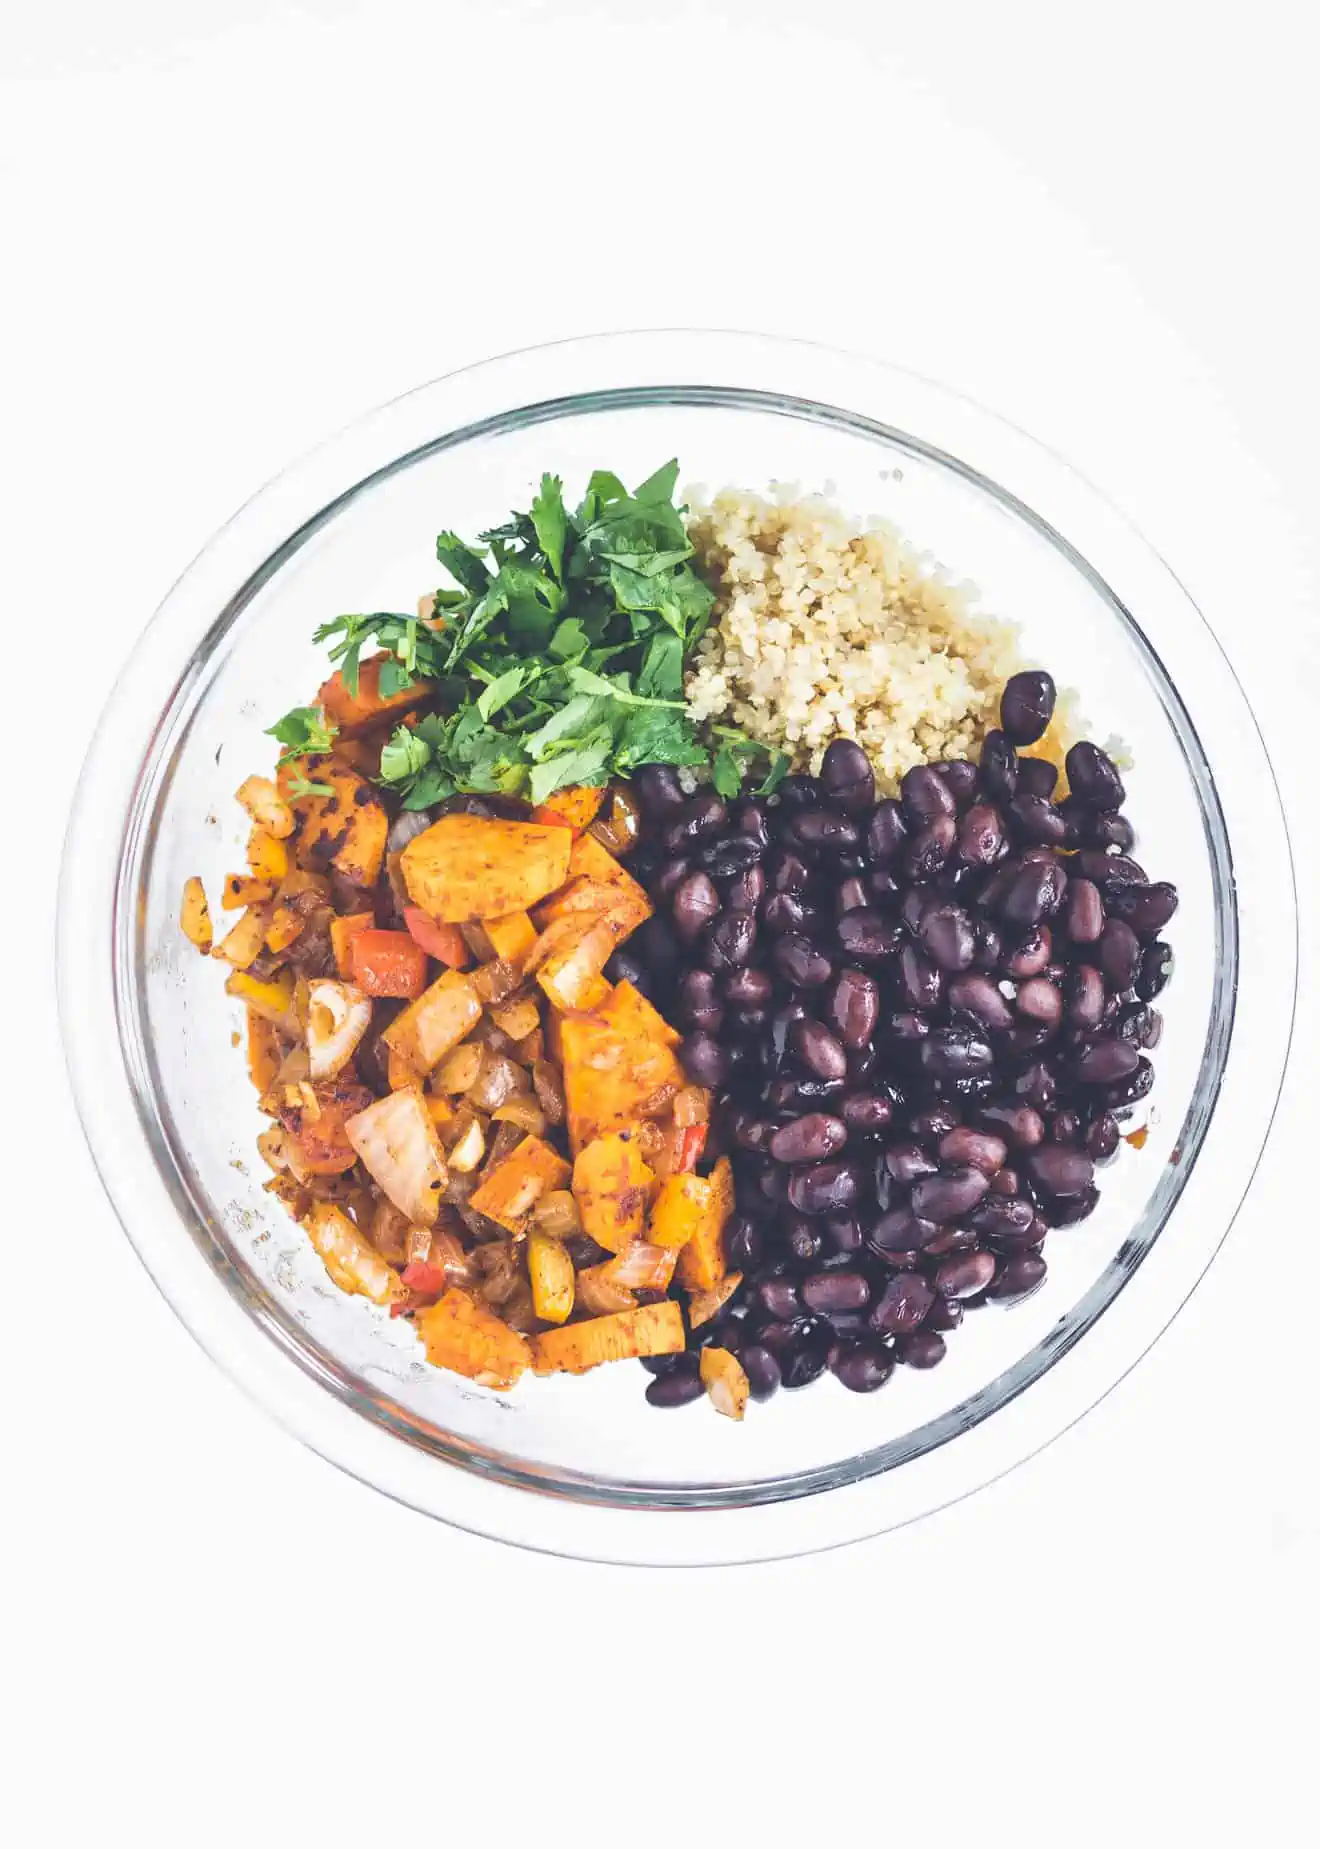 Bowl of cooked sweet potatoes, cilantro, quinoa and black beans